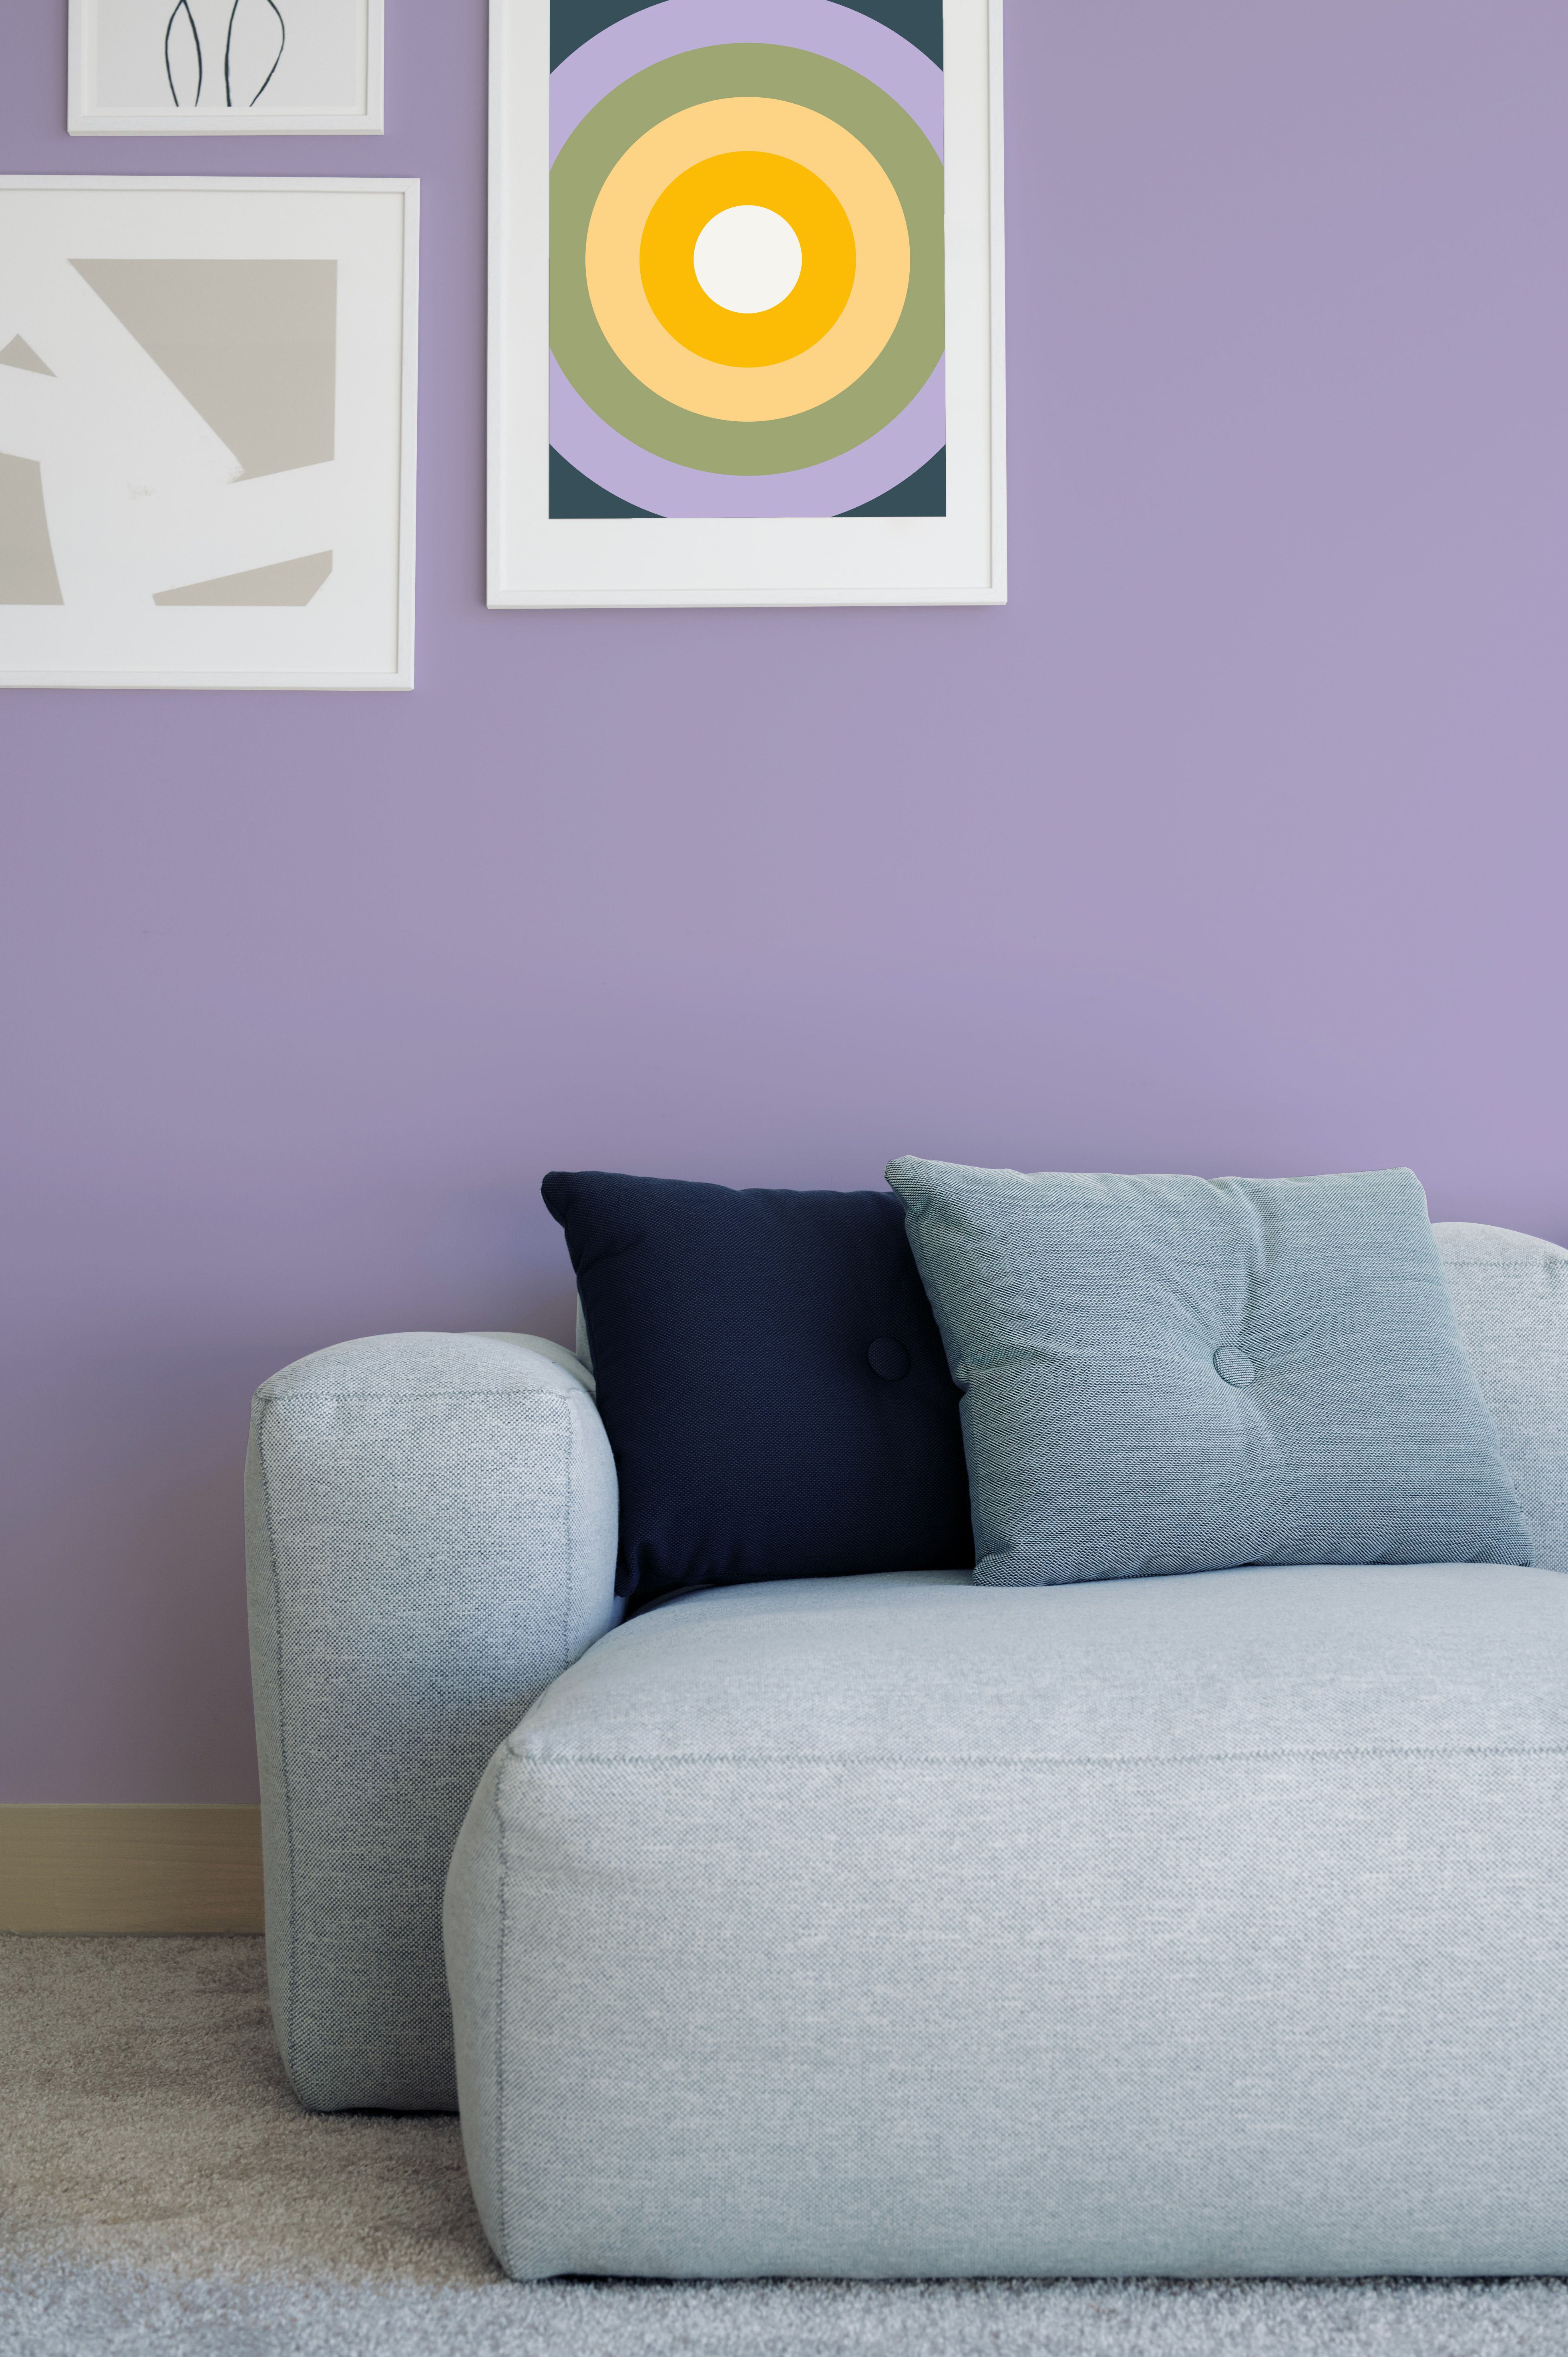 5 Tips for Winning With Colour at Home.